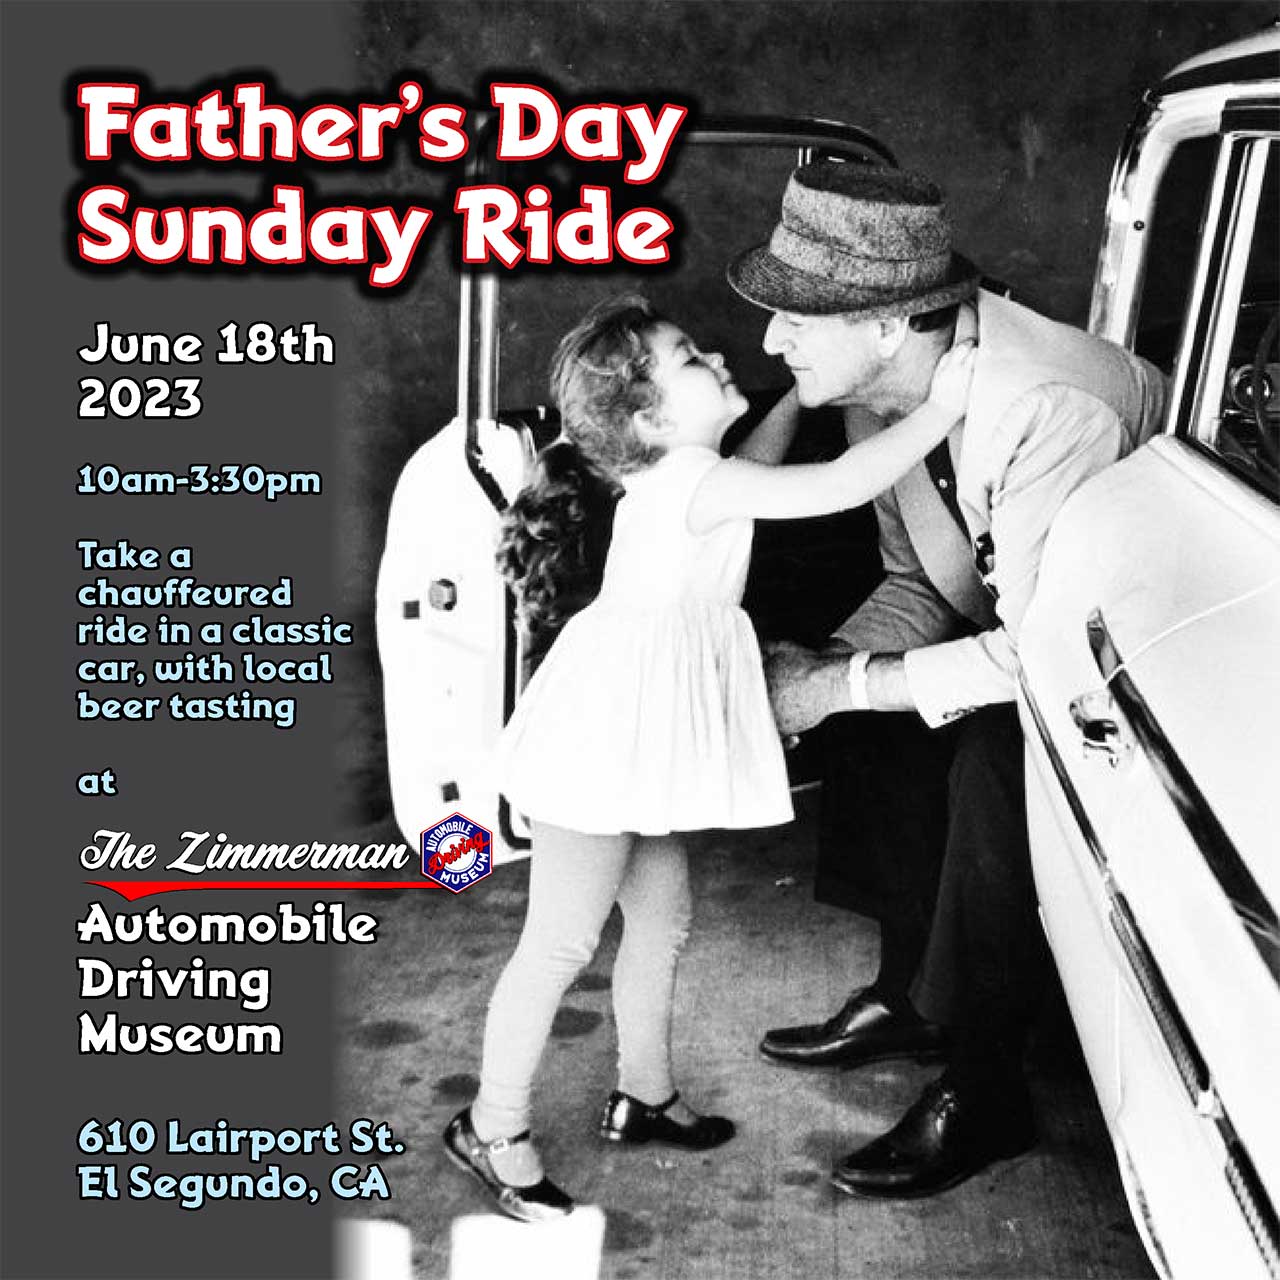 Father's Day Sunday Ride June 18, 2023